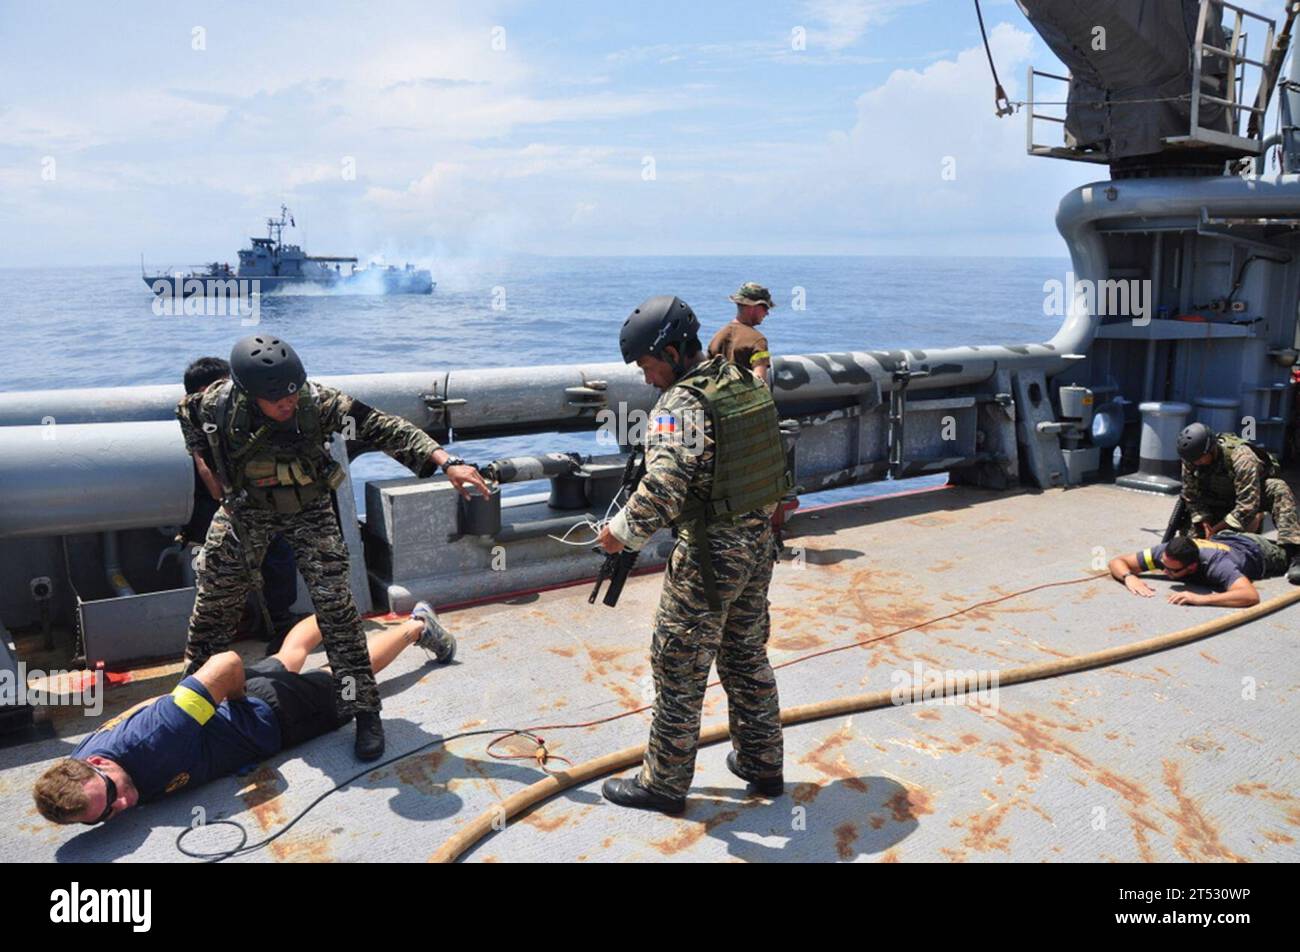 0908204220R-780 SOUTH CHINA SEA (Aug. 20, 2009) Philippine Navy Special Forces Sailors confront U.S. Sailors portraying Тcontact of interestУ crewmembers aboard military sealift command rescue and salvage ship USNS Safeguard (T-ARS 50), during an at-sea boarding exercise for Southeast Asia Cooperation Against Terrorism (SEACAT) 2009. SEACAT is a weeklong at-sea exercise designed to highlight the value of information sharing and multinational coordination within a scenario that gives participating navies practical maritime interception training opportunities. (U.S. Navy Stock Photo